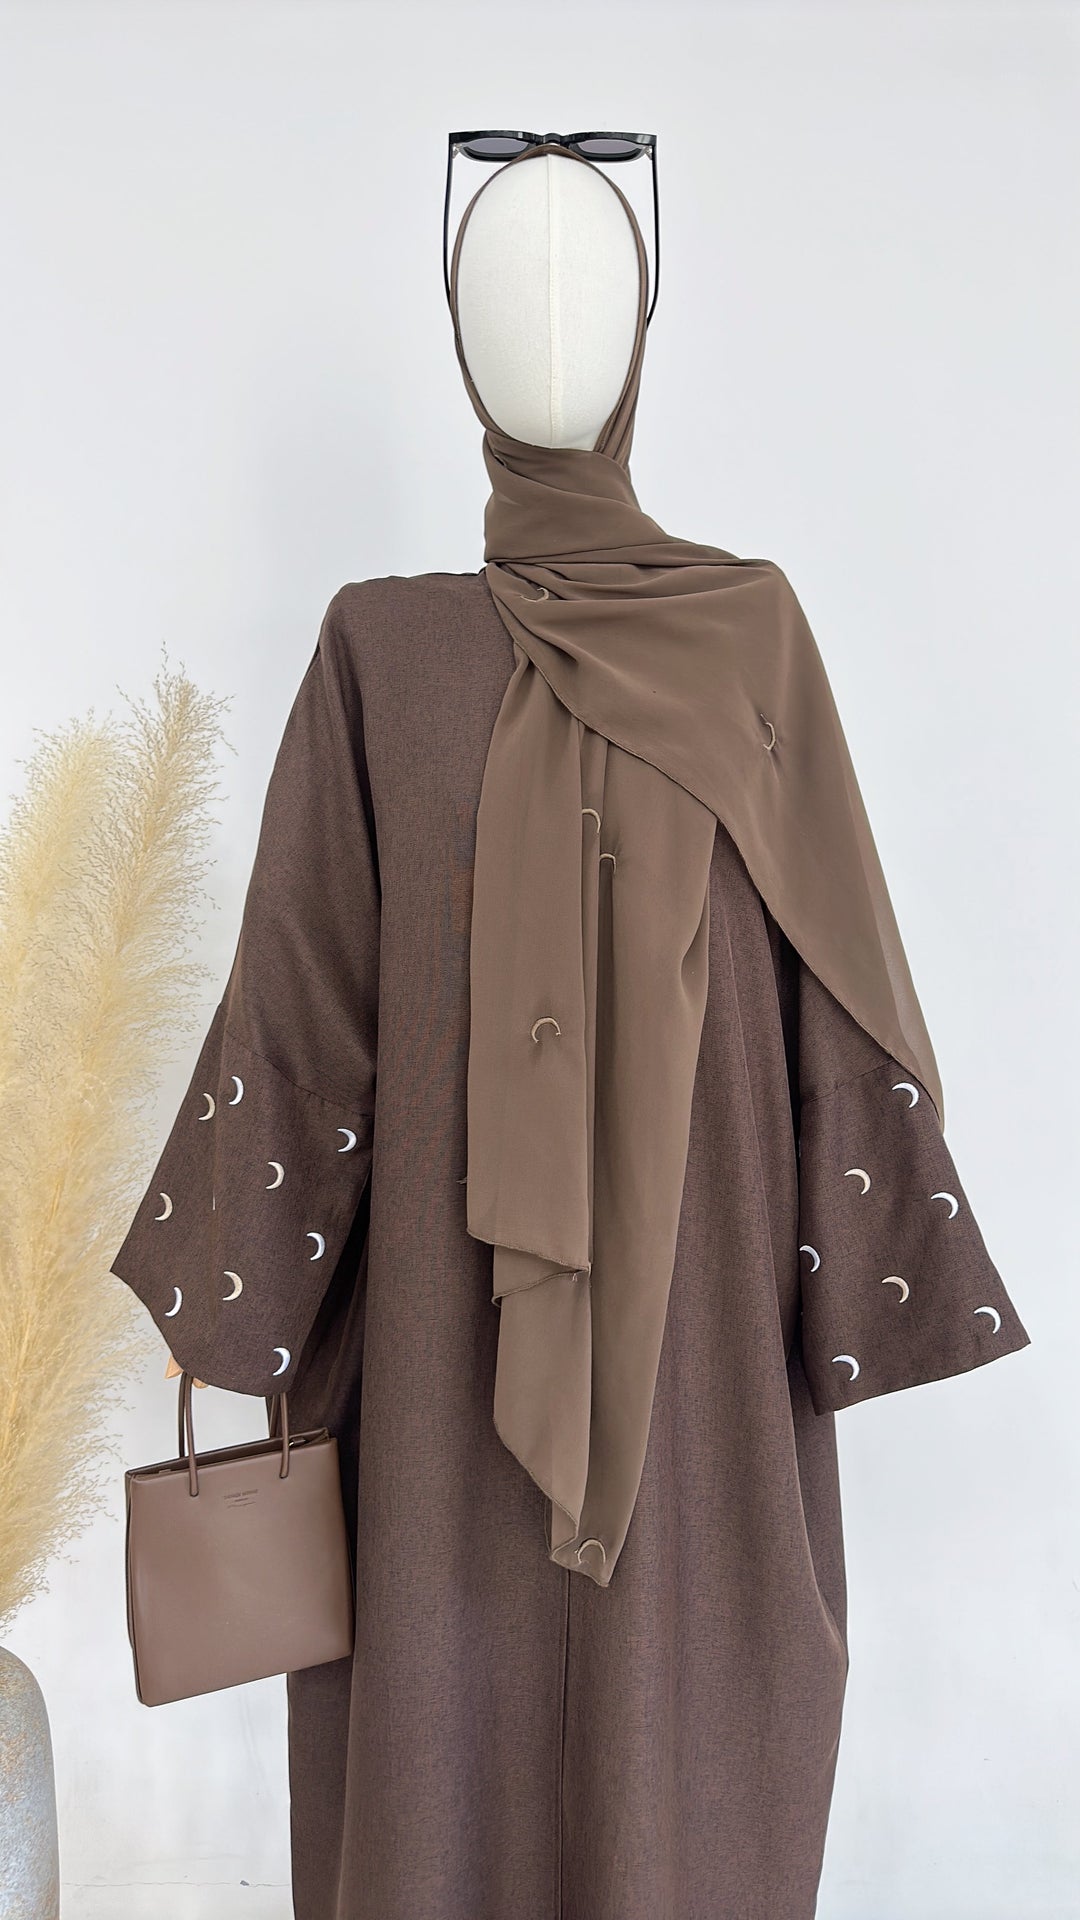 Get trendy with Iris Lightweight Duster Open Abaya - Brown - Cardigan available at Voilee NY. Grab yours for $54.90 today!